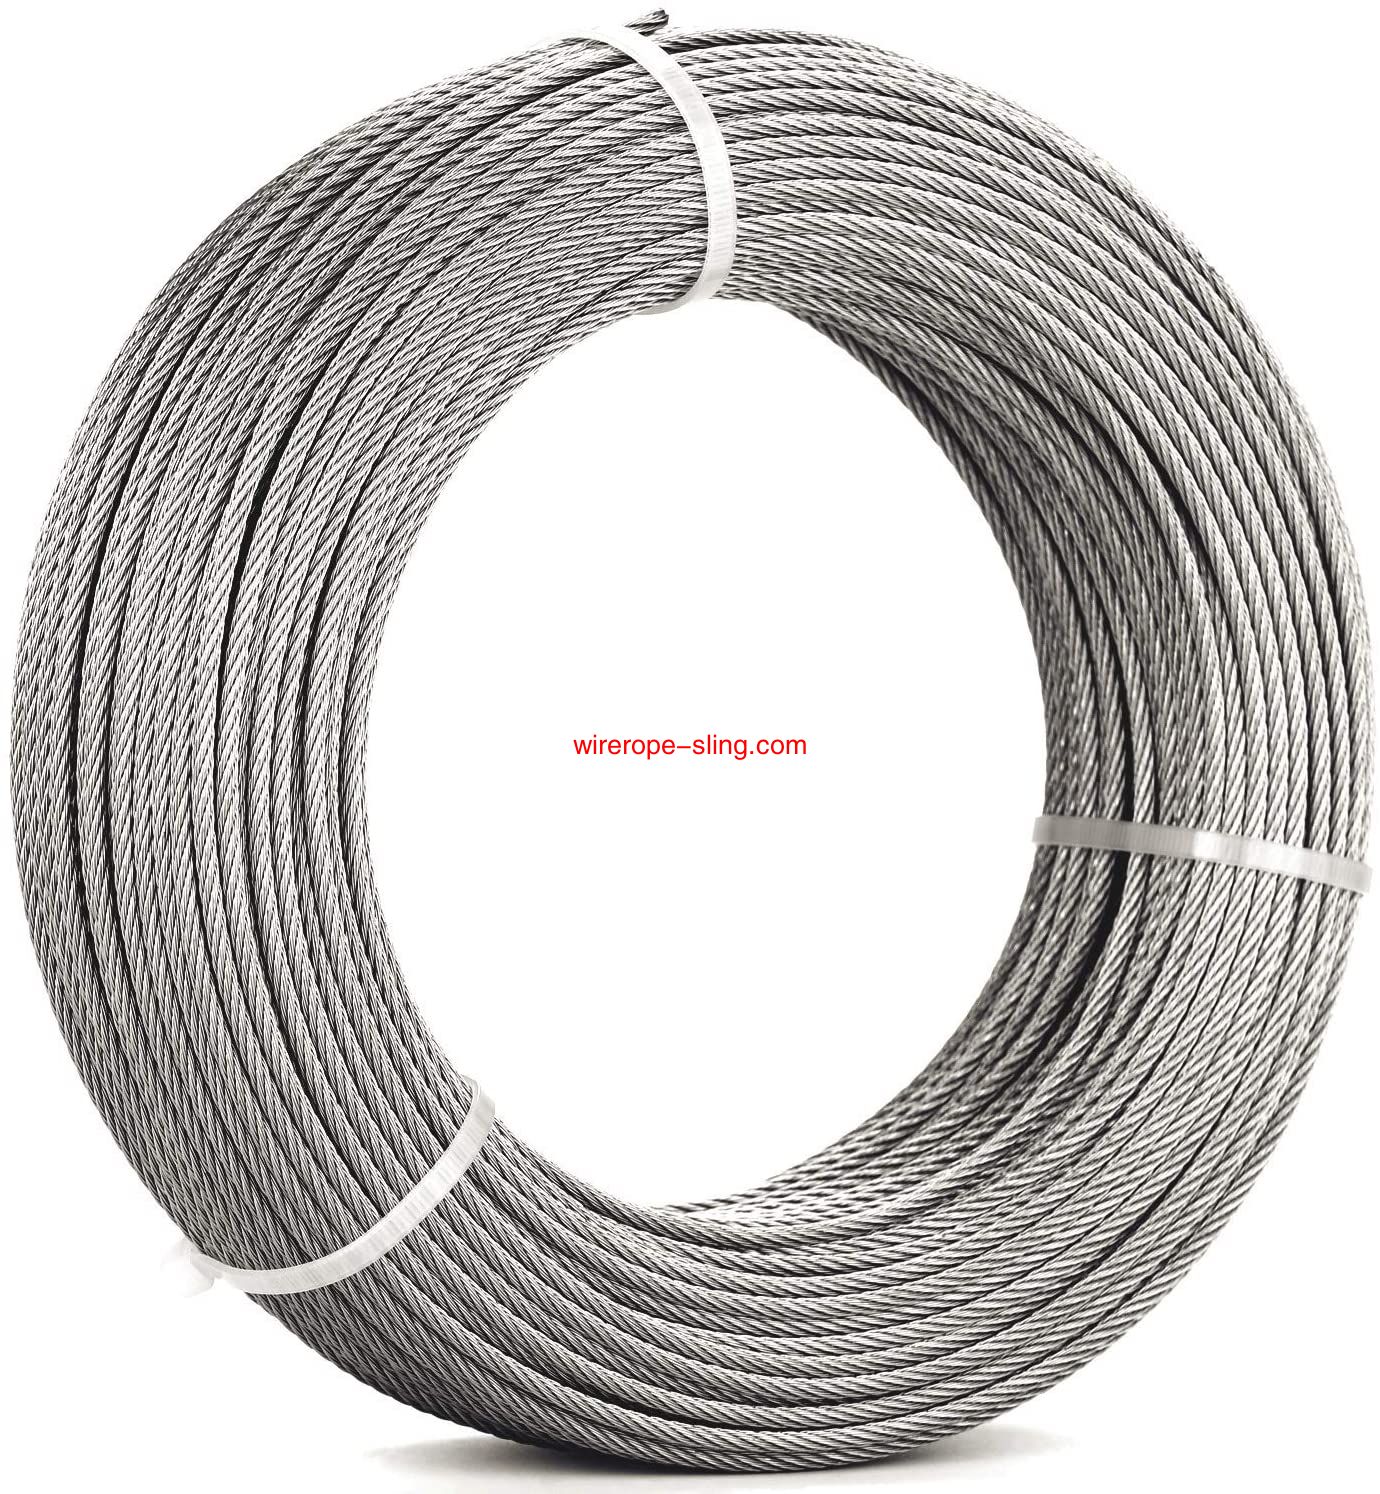 1/8 Stainless Steel Aircraft Wire Rope for Deck Cable Railing Kit,7 x 7 200 Feet T 316 Marine Grade